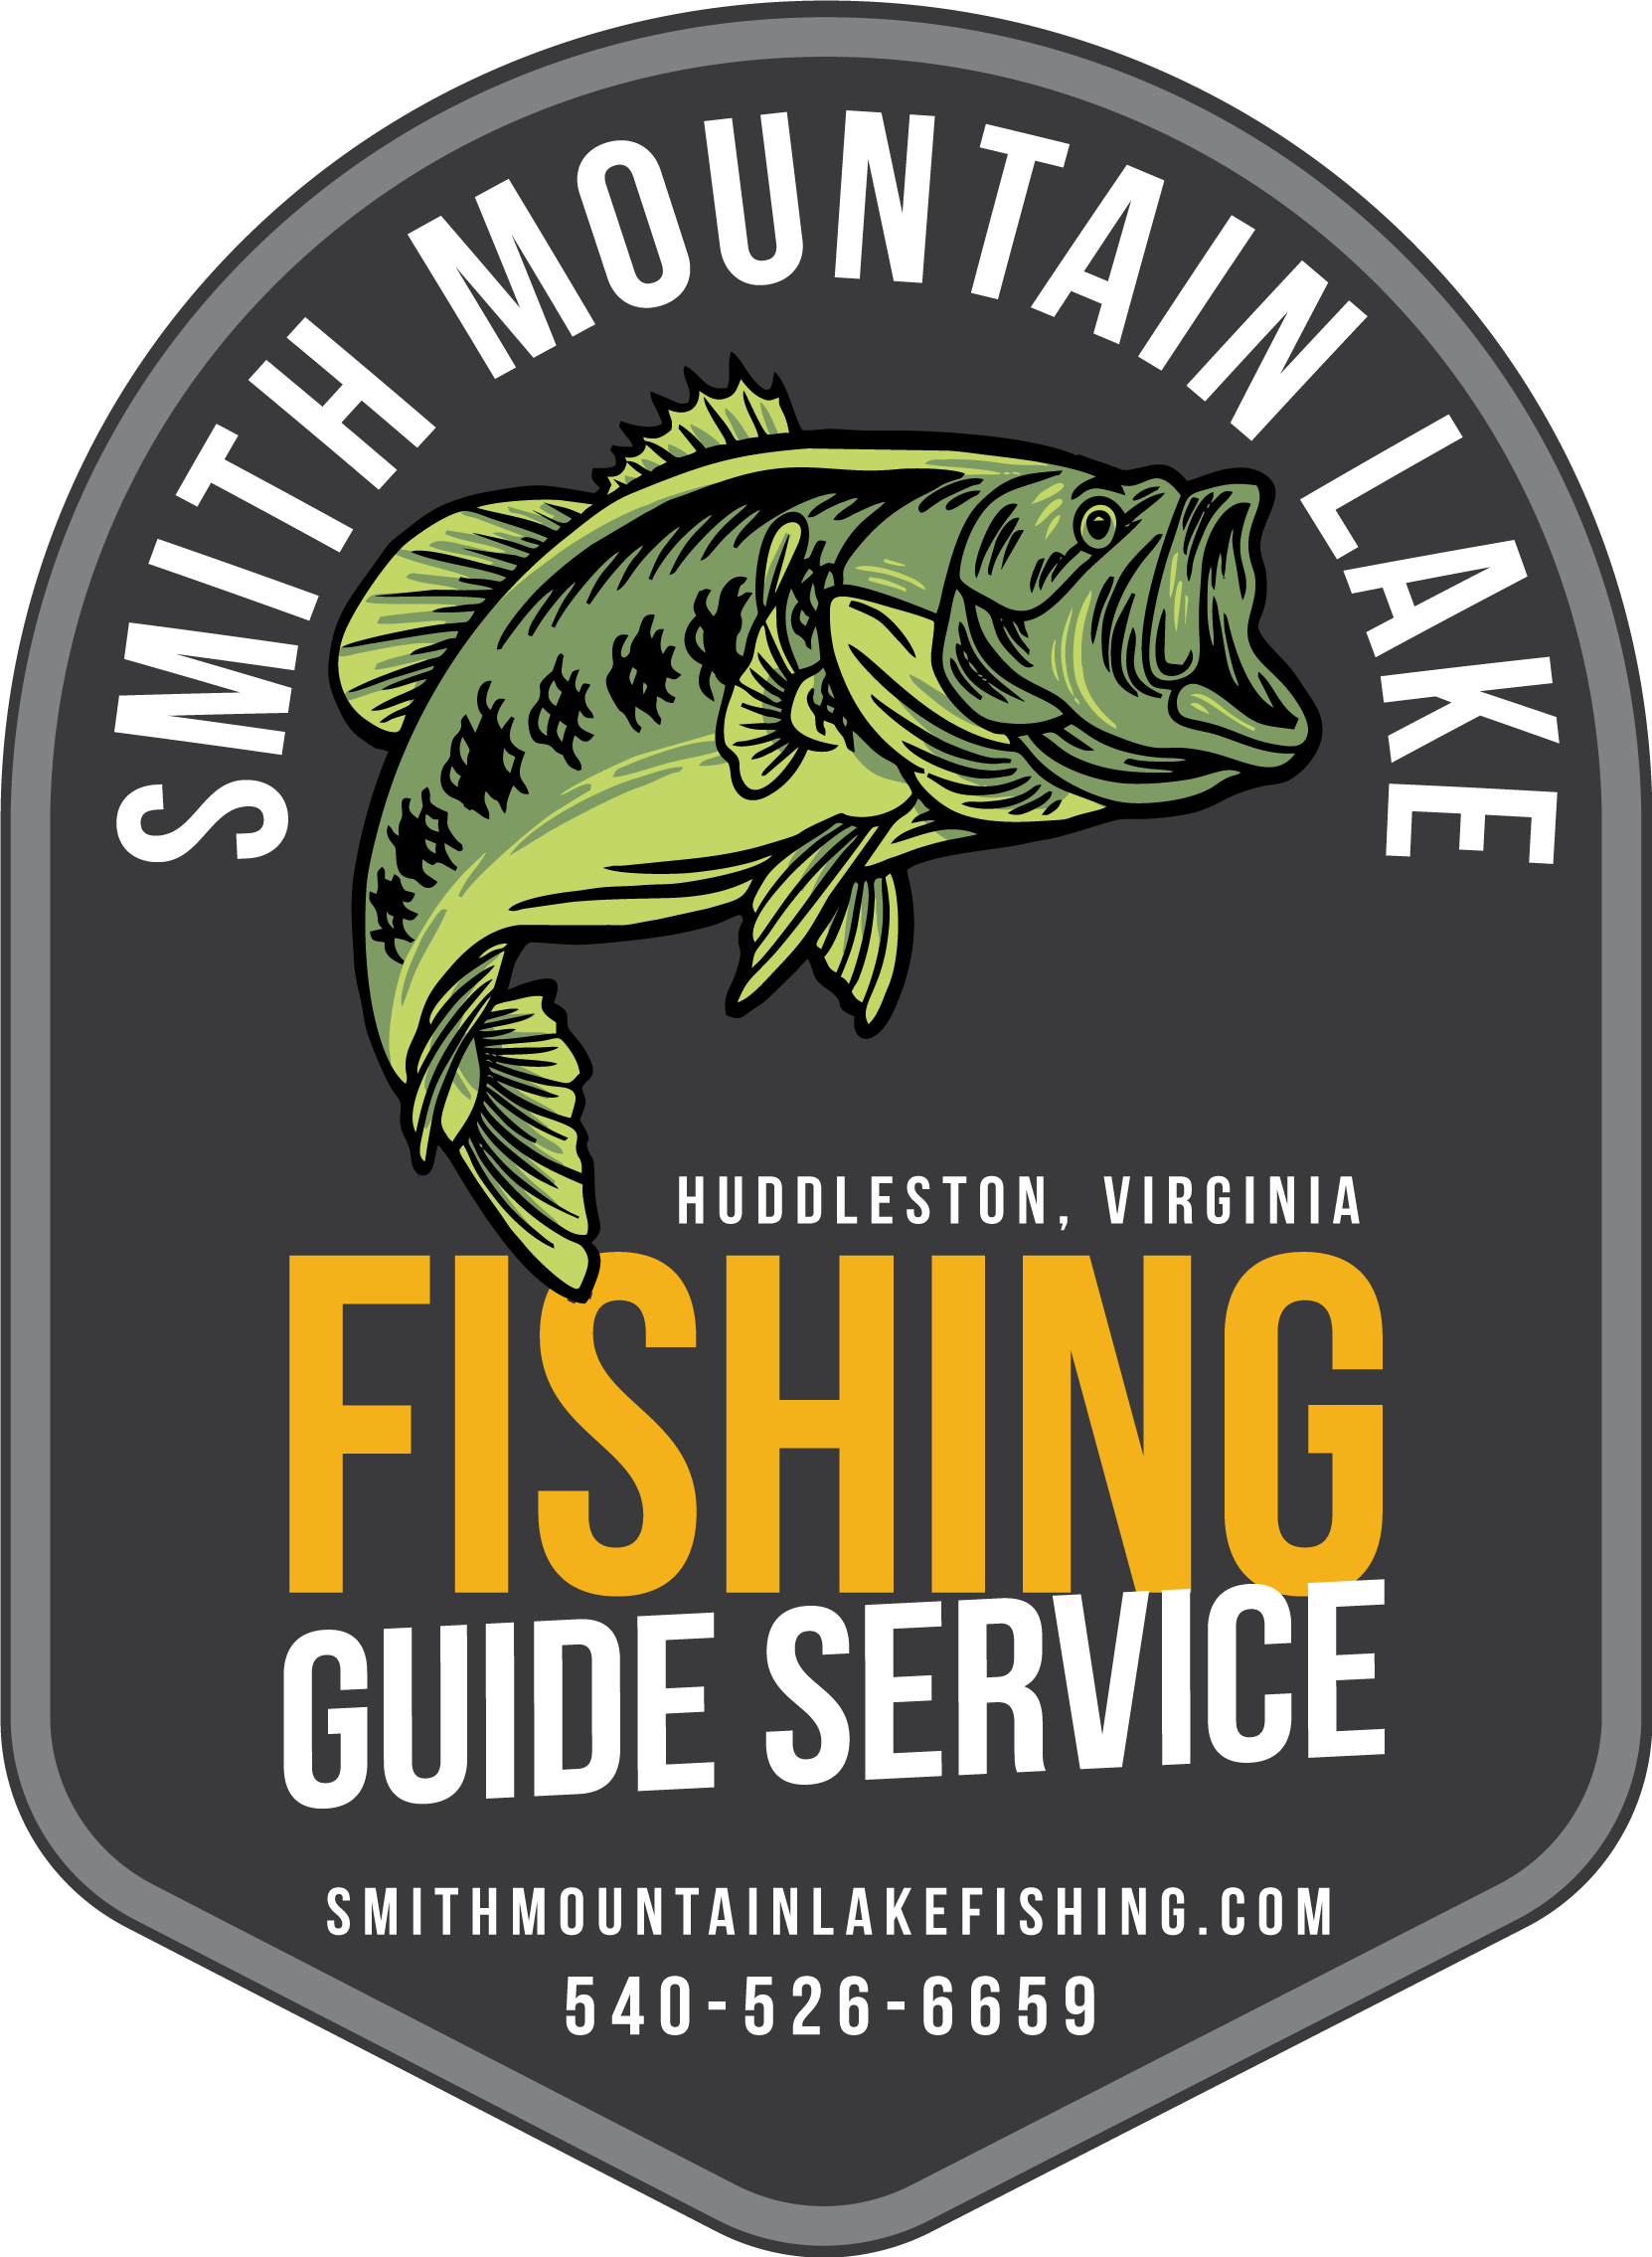 Smith Mountain Lake January Fishing Report - Game on! Fish are